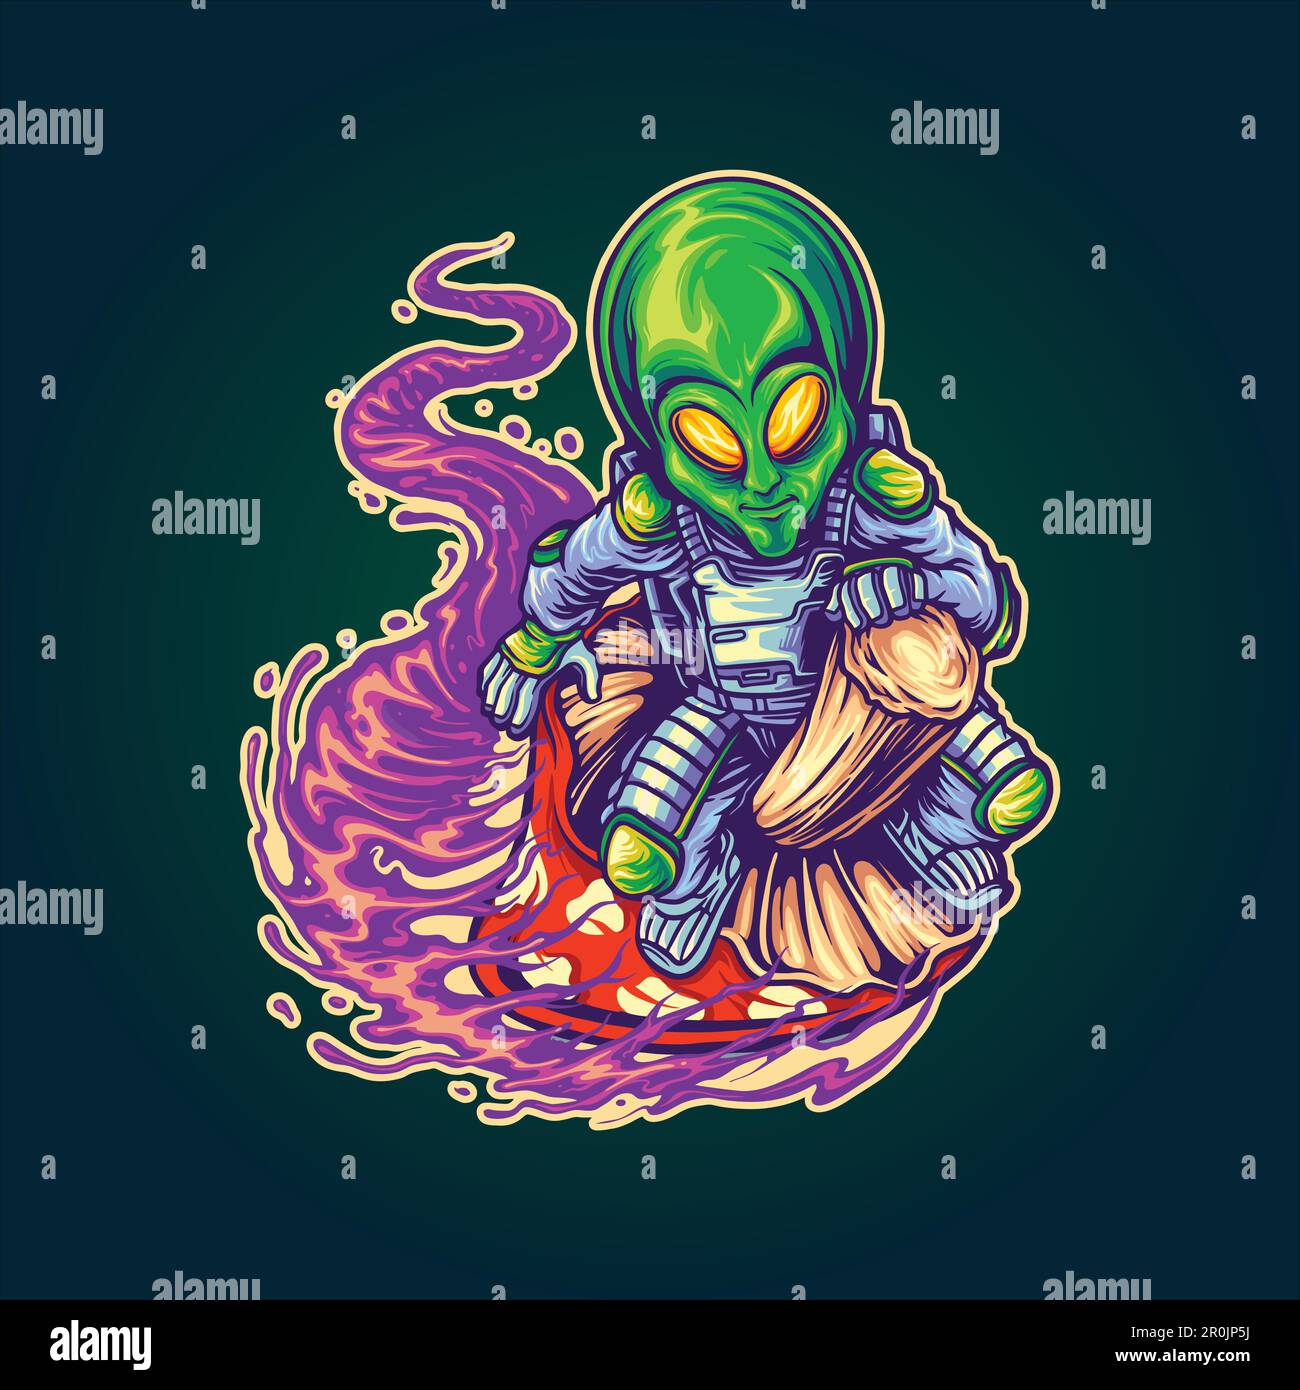 Astronaut alien rush on space with magic mushroom logo illustrations vector for your work logo, merchandise t-shirt, stickers and label designs, poste Stock Vector